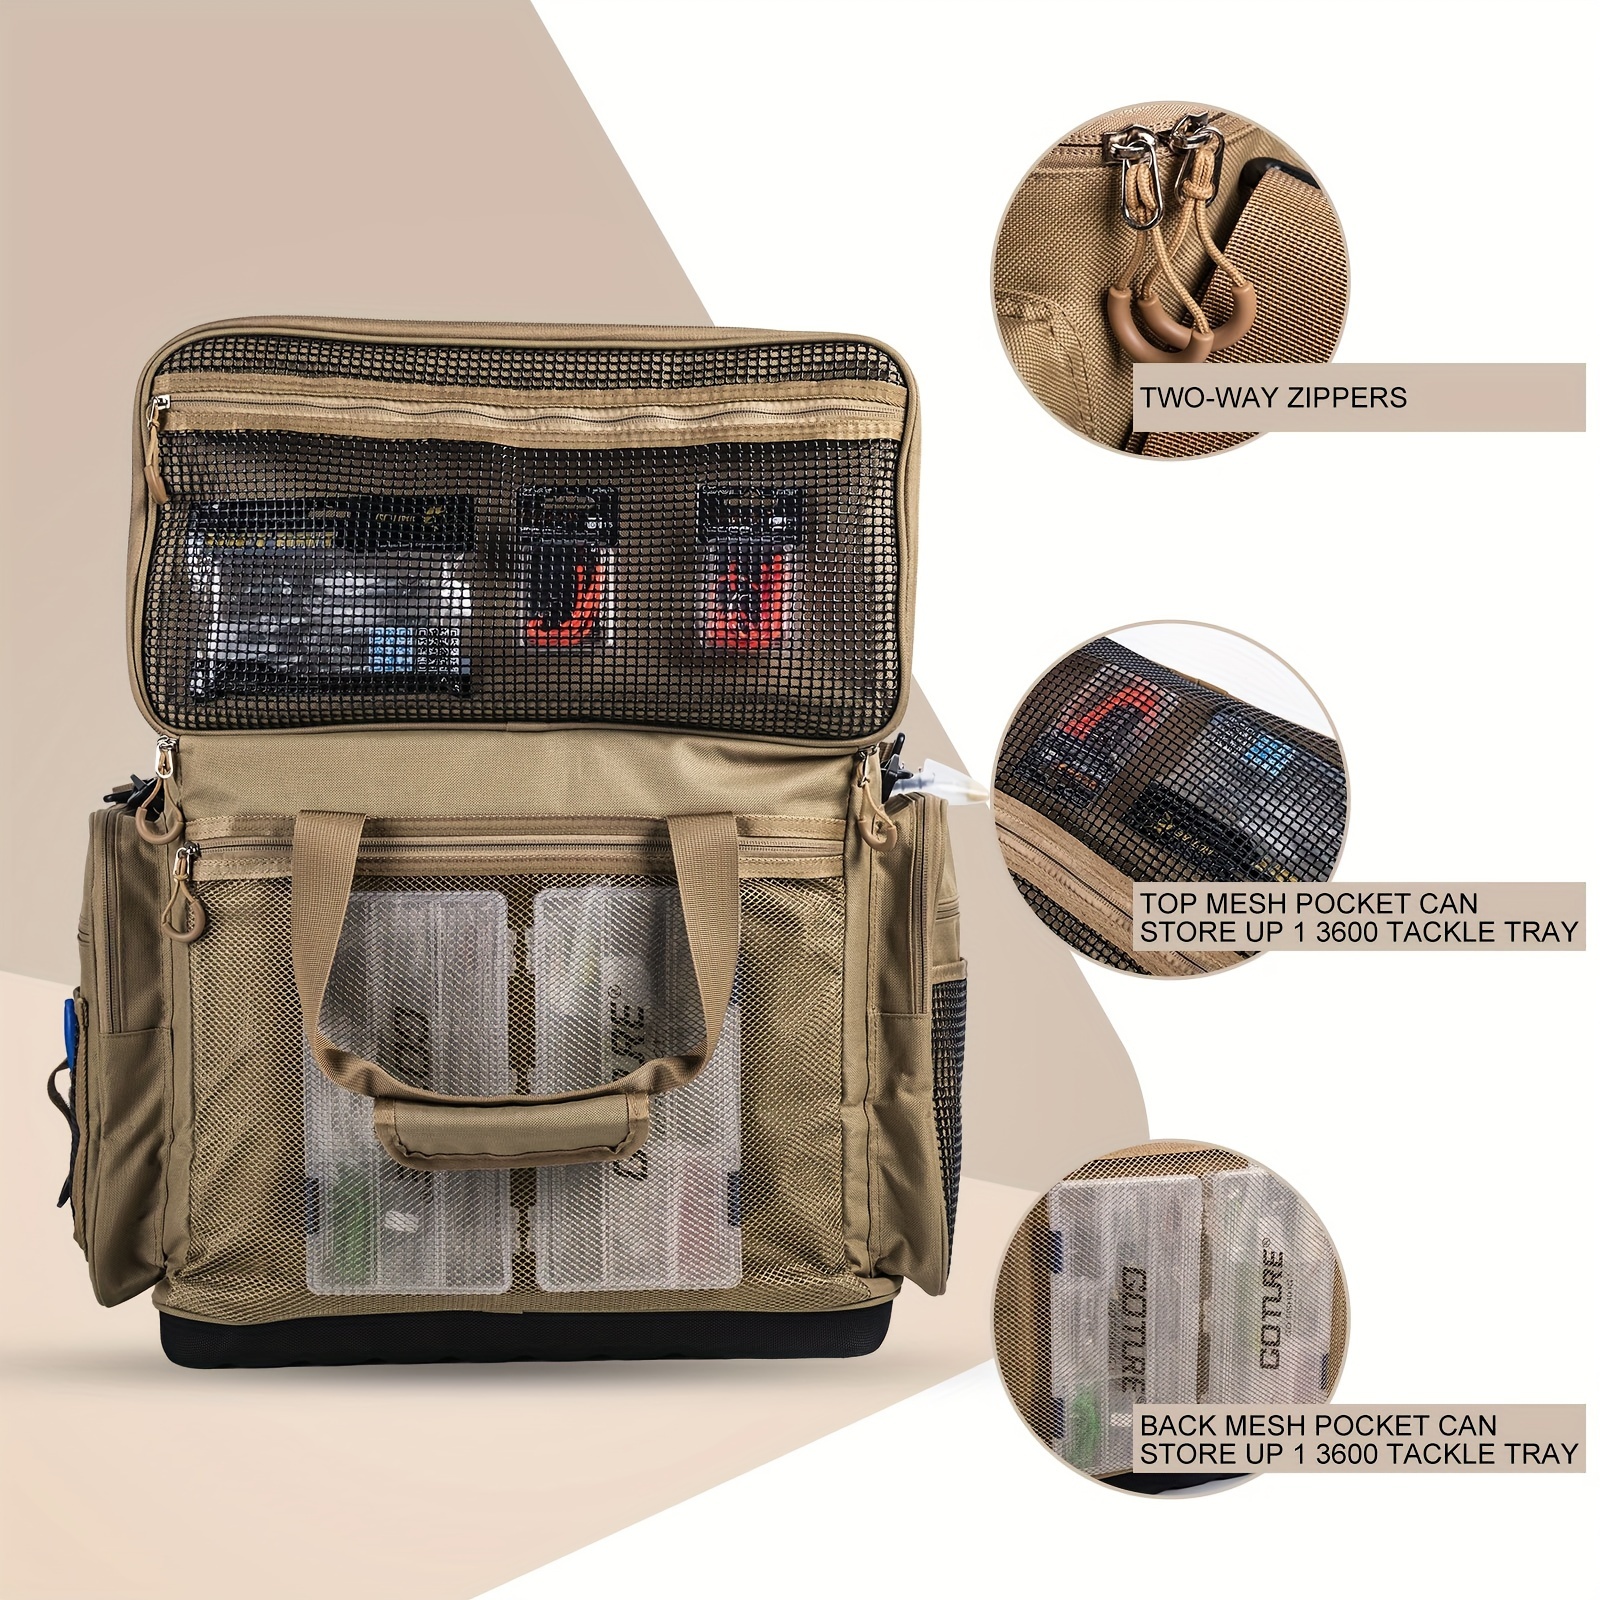  Goture Large Tackle Bag,Store Up to 8PCS 3700 Plus 4PCS 3600  Tackle Trays,Water Resistant Large Tackle Bag,Saltwater Fishing Gear Bag,Big  Fishing Bag,Removable Dividers(20.8x15.2x11.4)-Camo : Sports & Outdoors